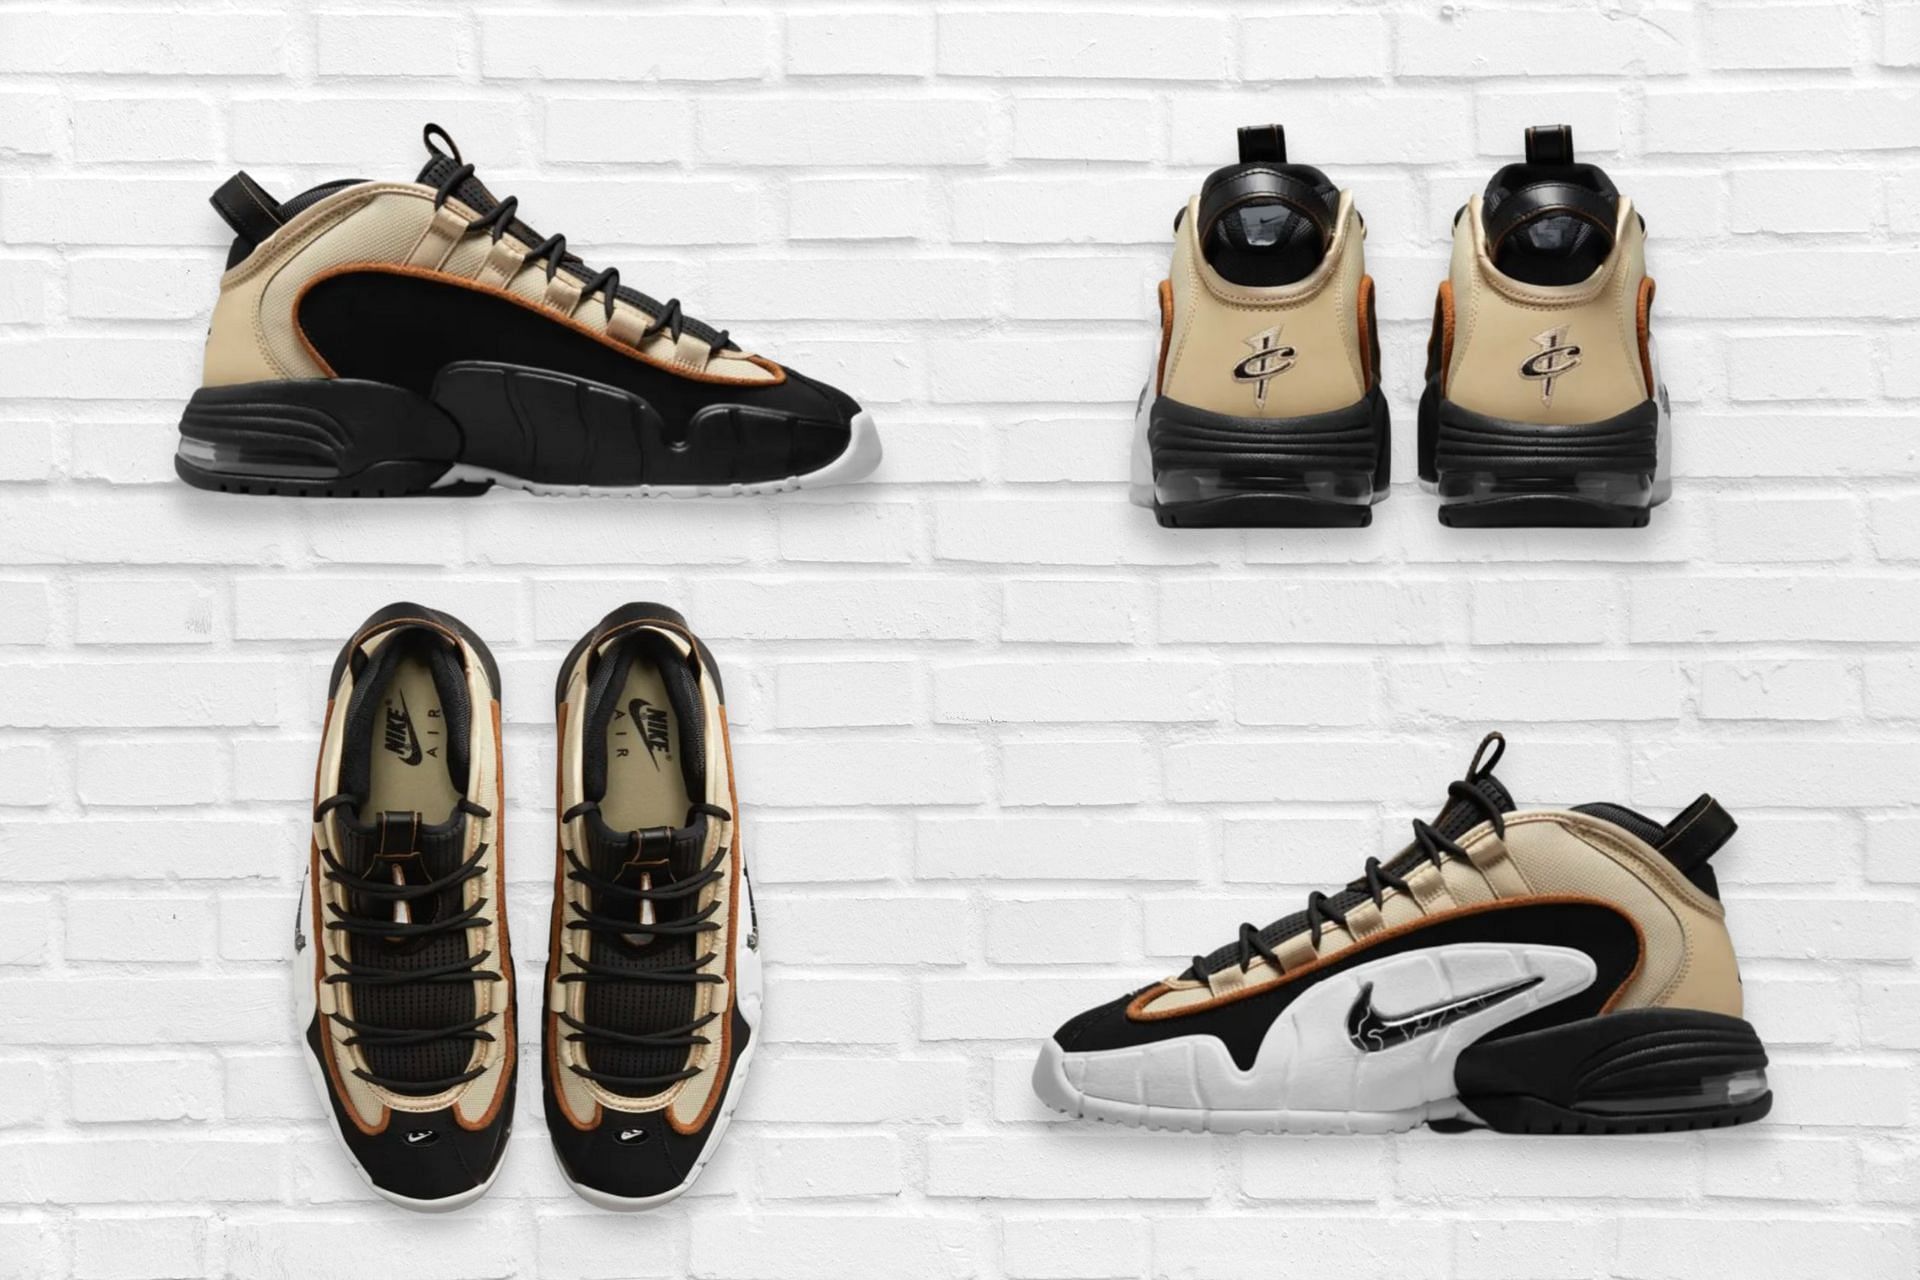 Here&#039;s a detailed look at the upcoming Nike Air Max Penny 1 Rattan shoe (Image via Sportskeeda)